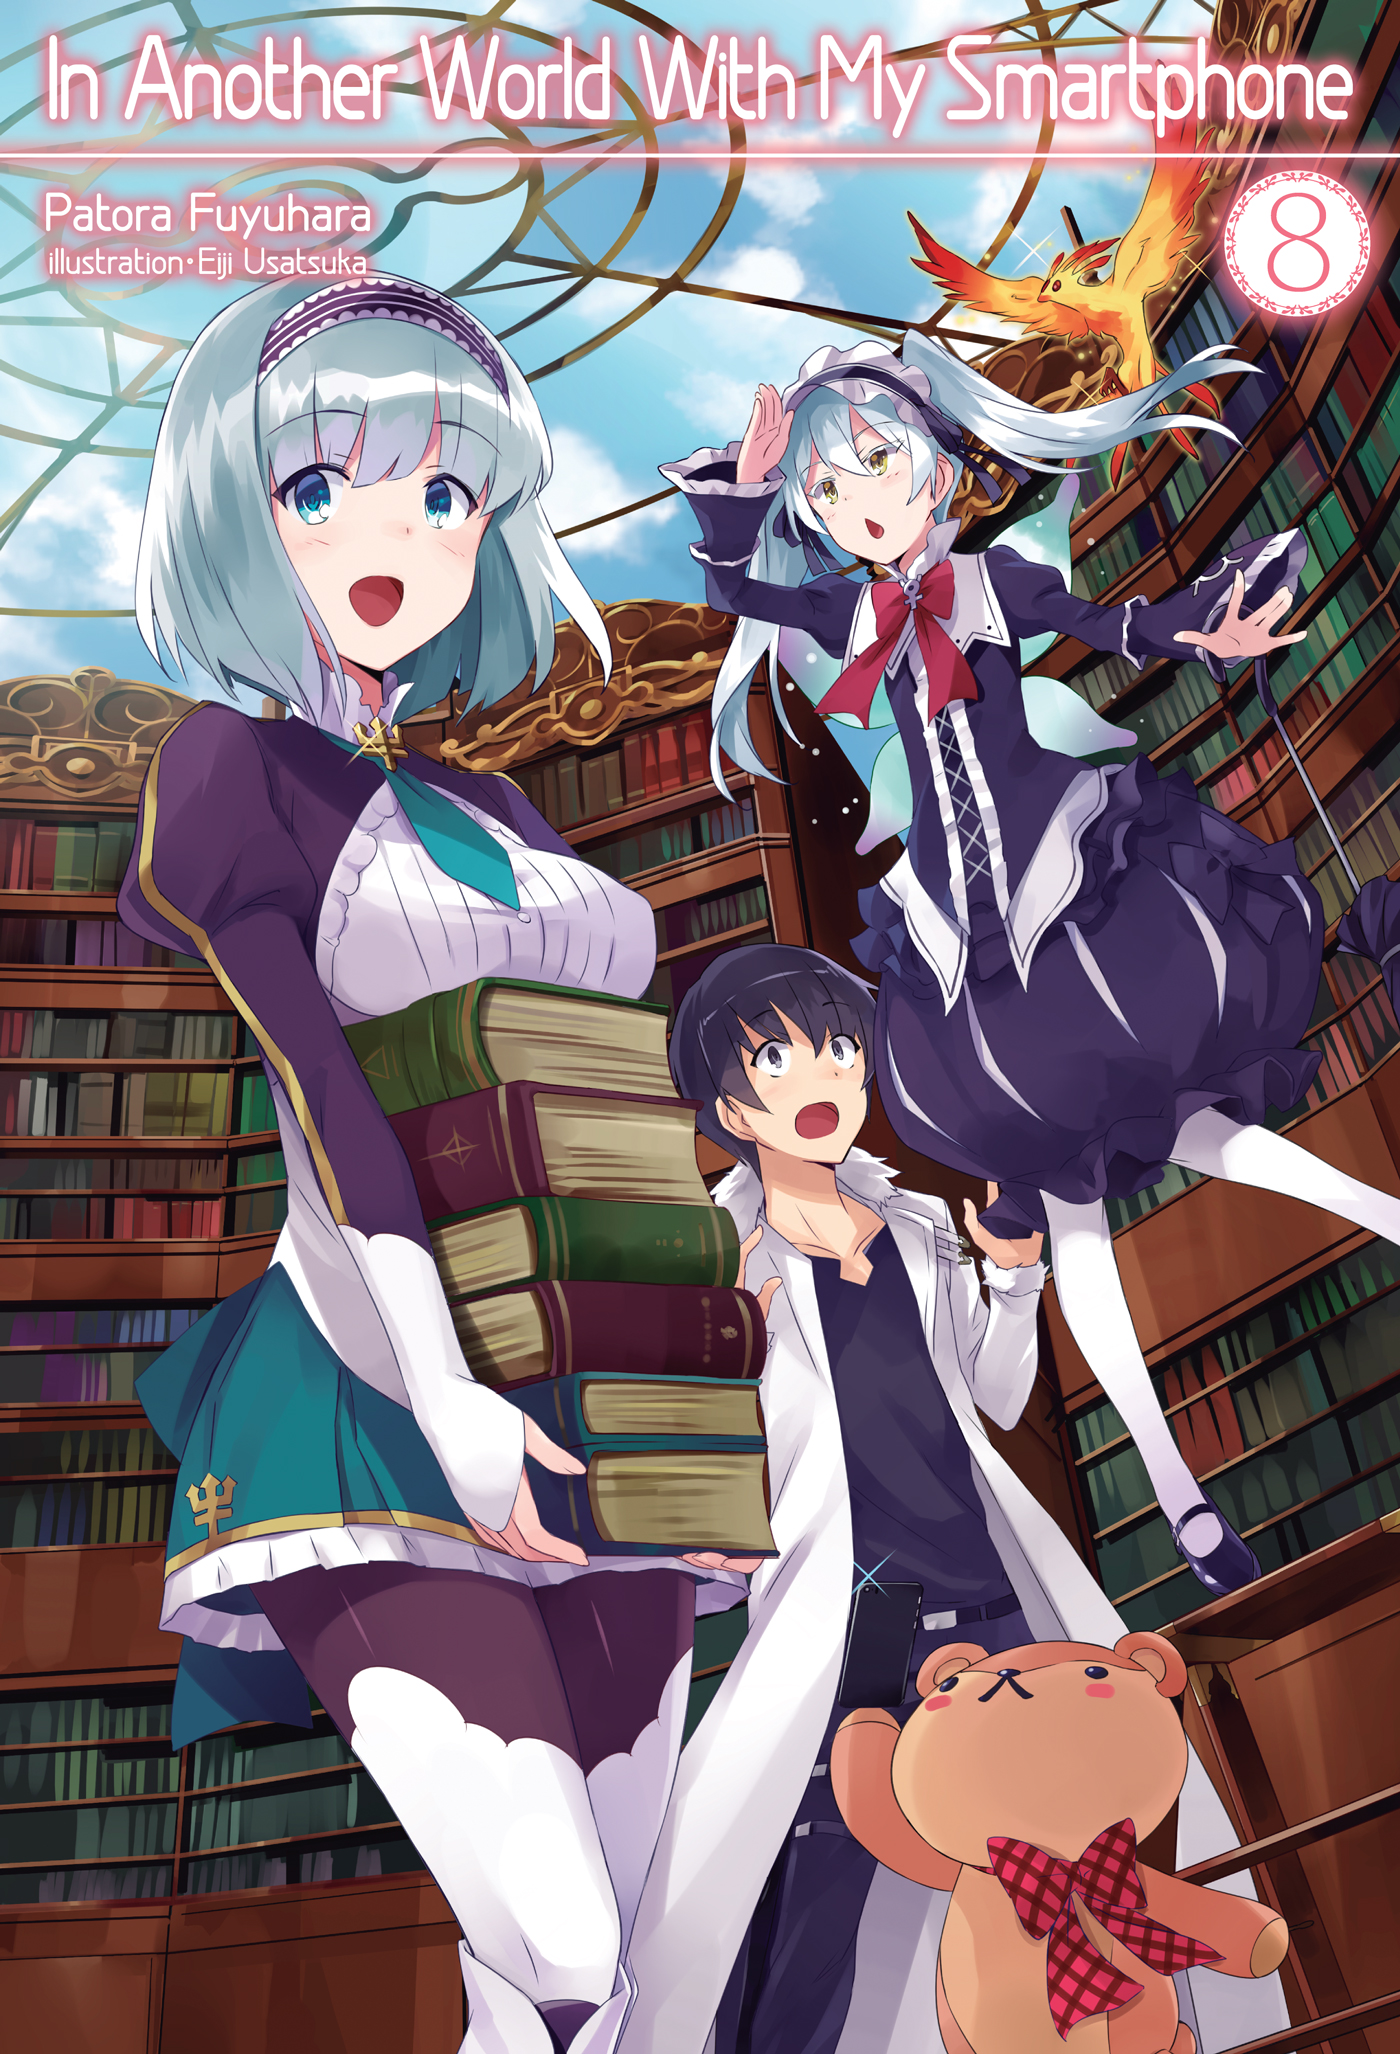 Light Novel Volume 8  In Another World With My Smartphone Wiki